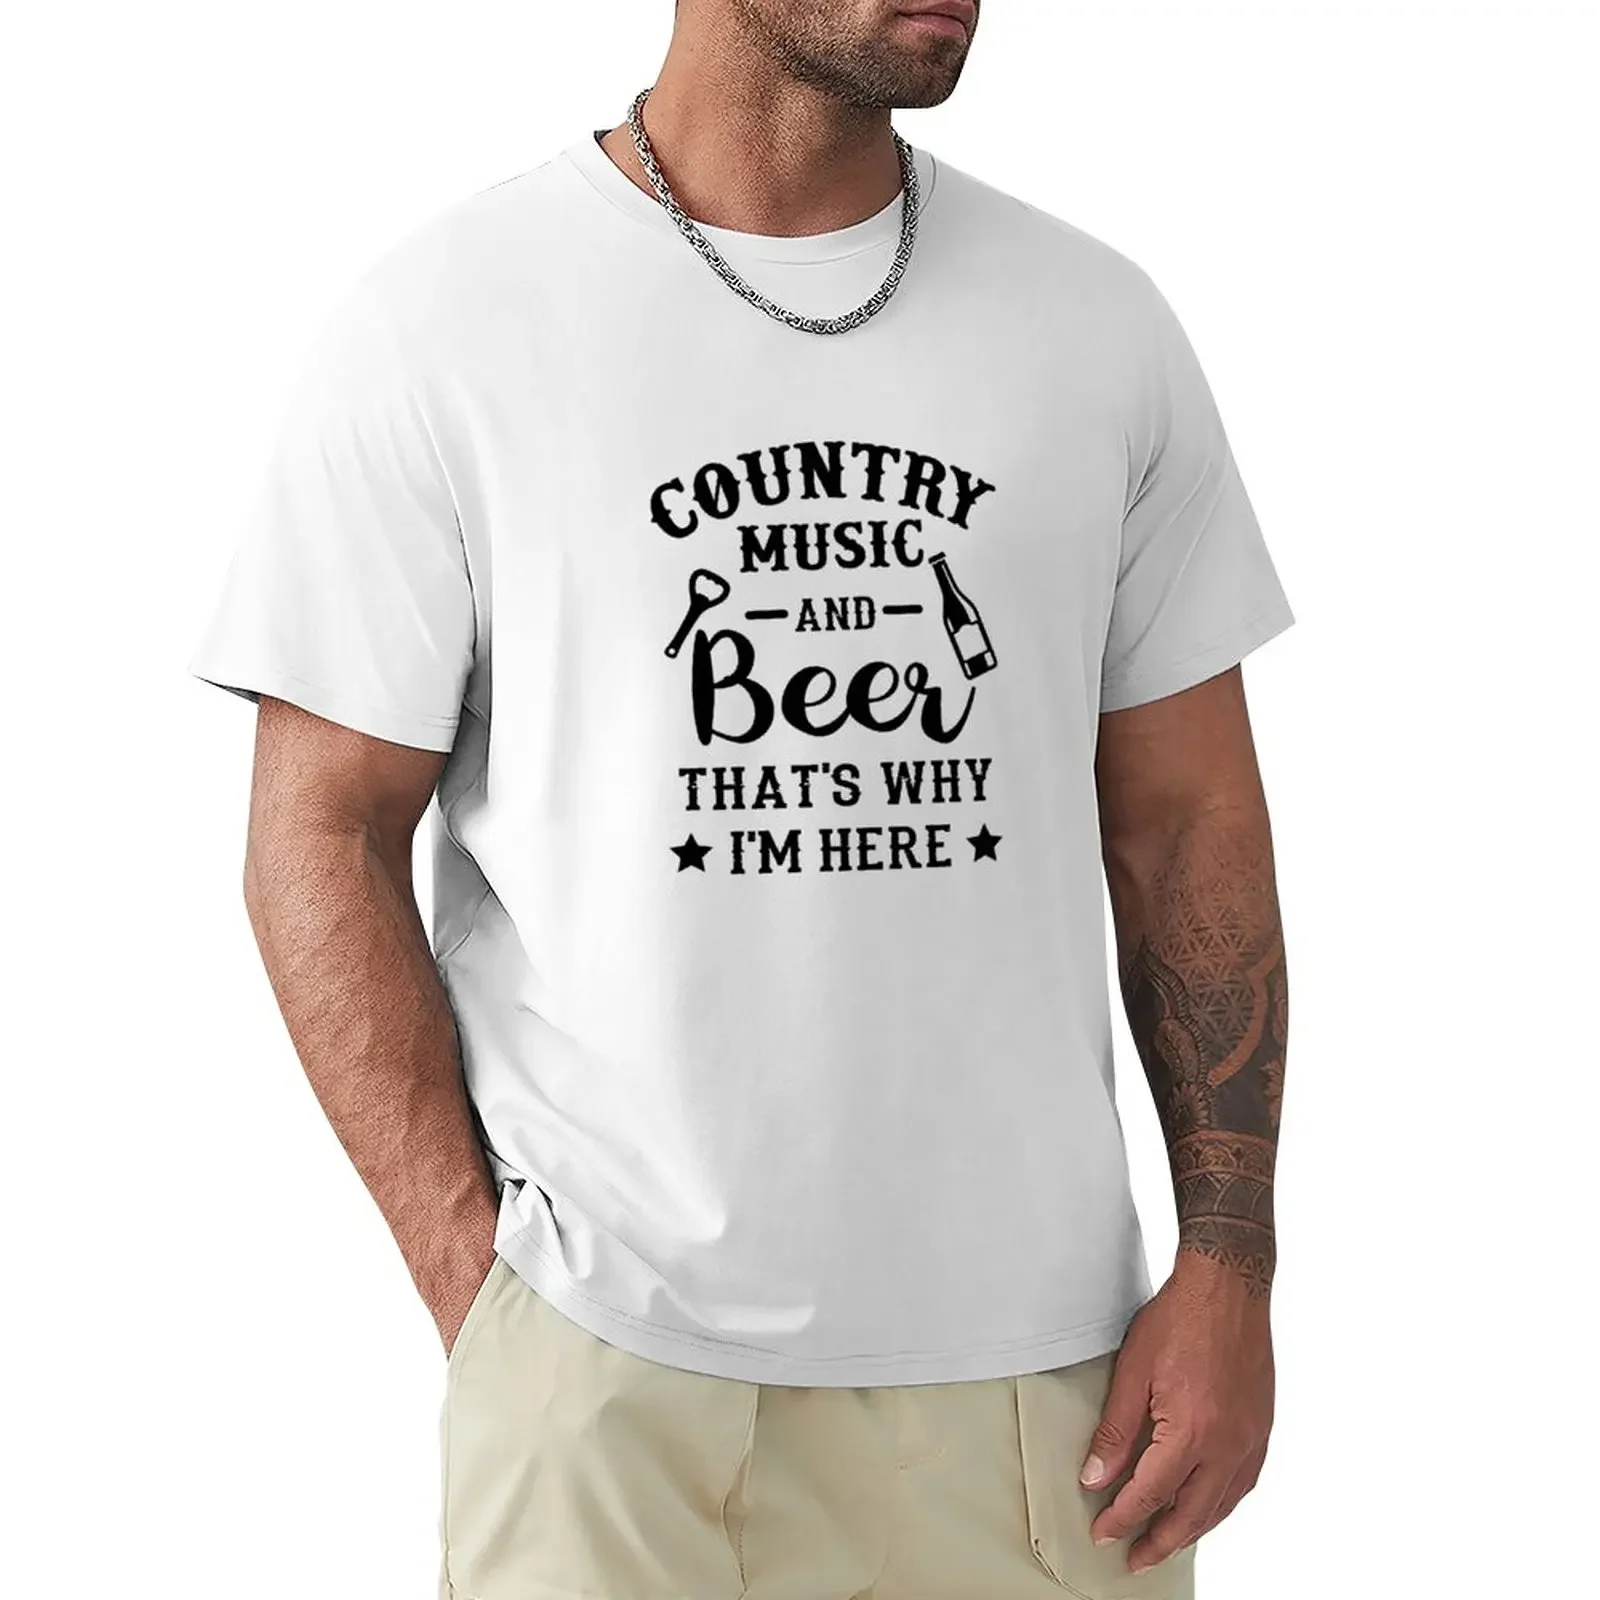 

Country Music And Beer That's Why I'm Here Funny Beer Lover T-Shirt T-Shirt vintage t shirt Tee shirt funny t shirts for men